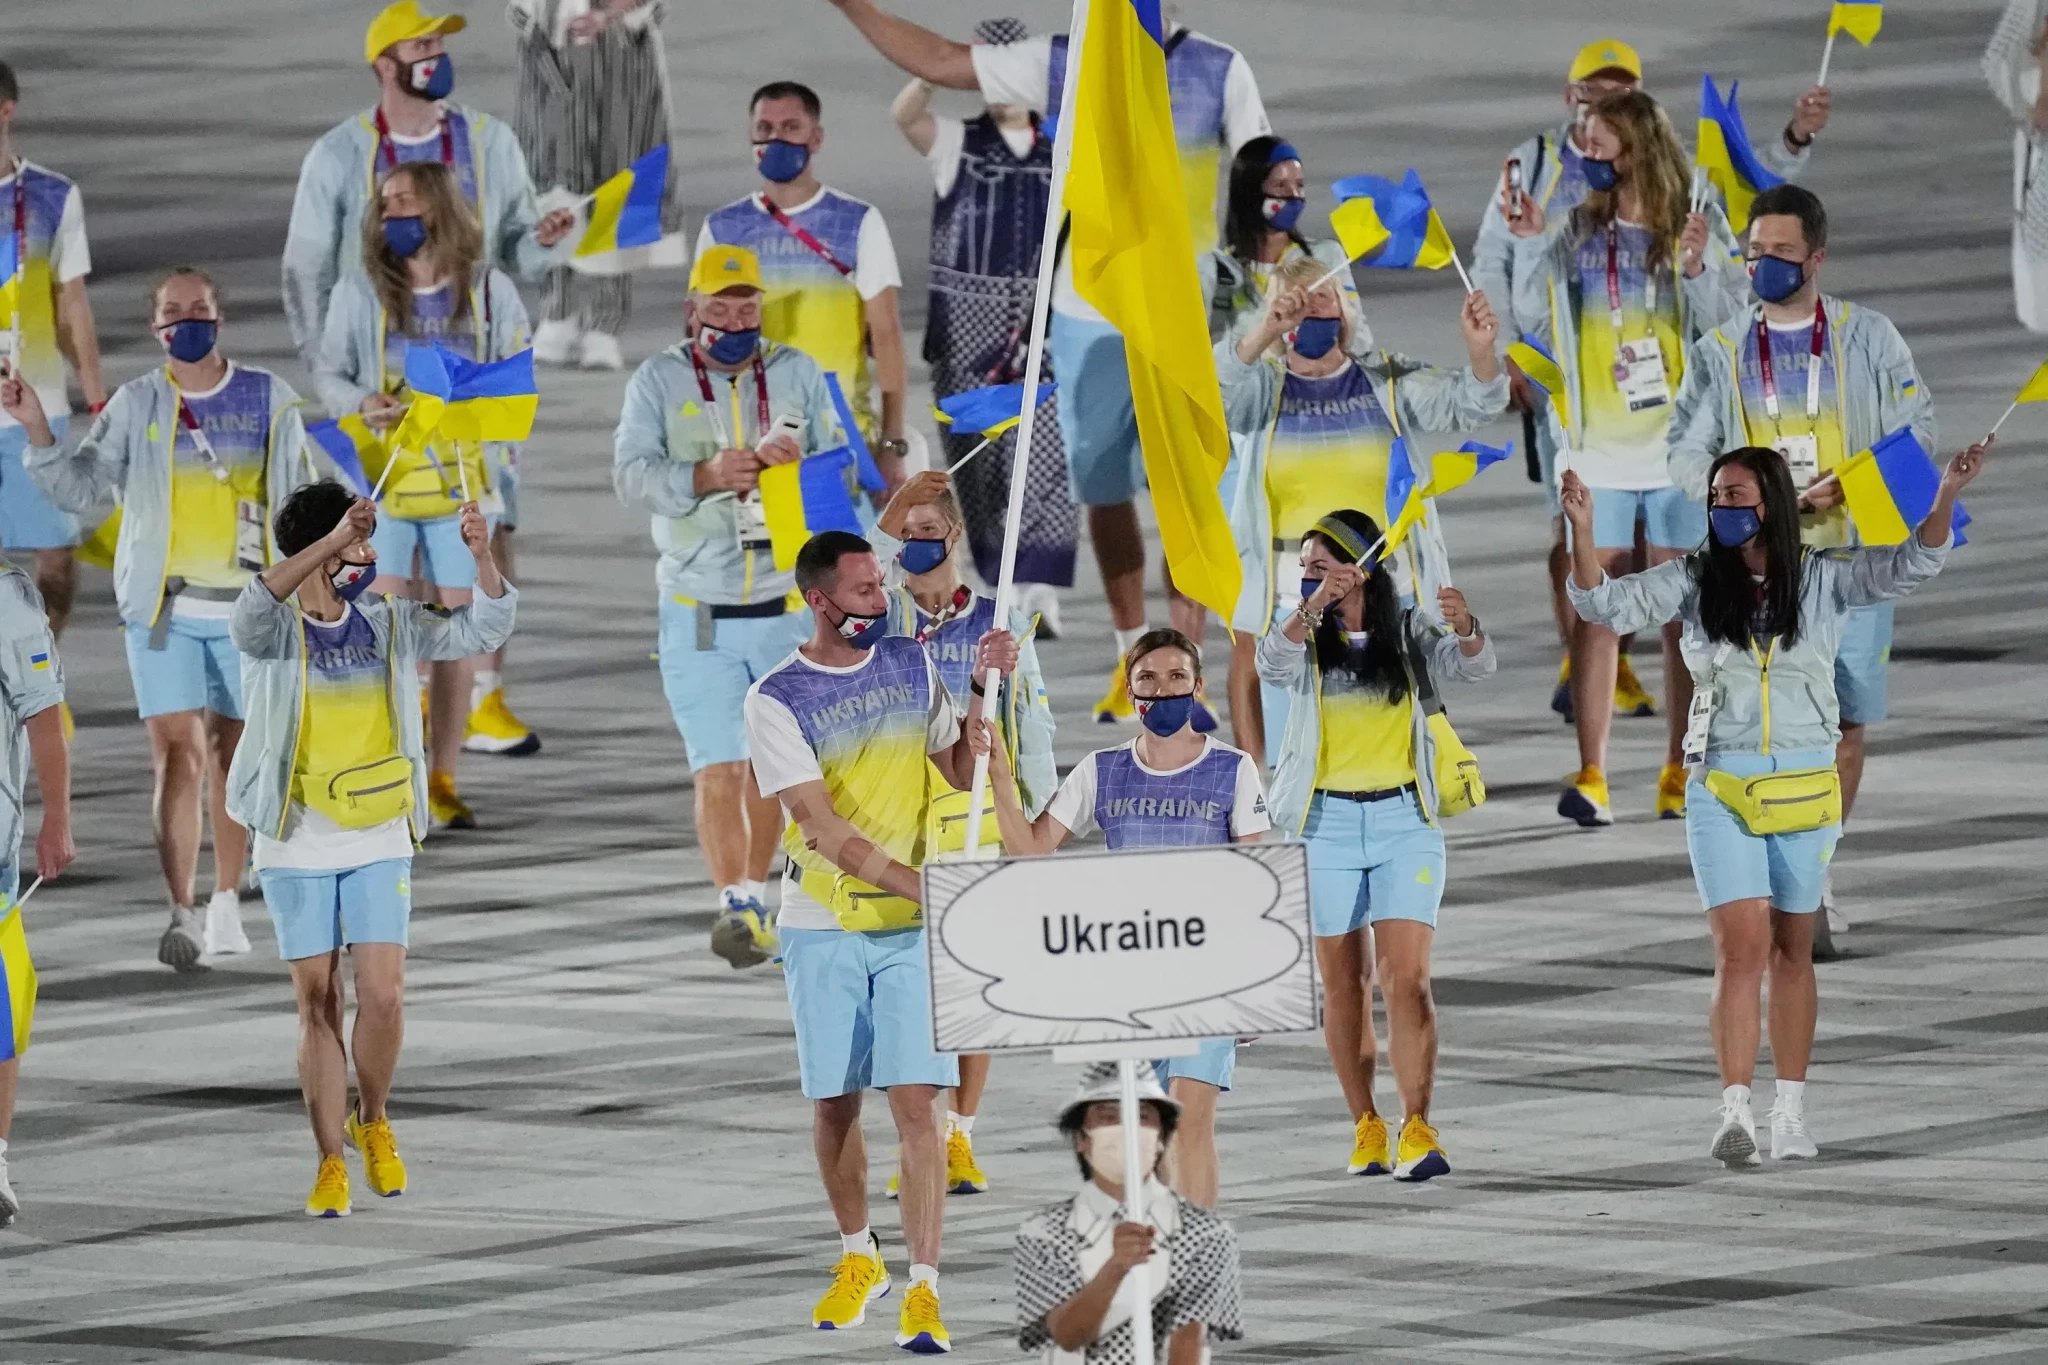 The Ukrainian Government has adopted a resolution to strip National Federations of their status and funding if athletes competed in events with Russians ©Getty Images